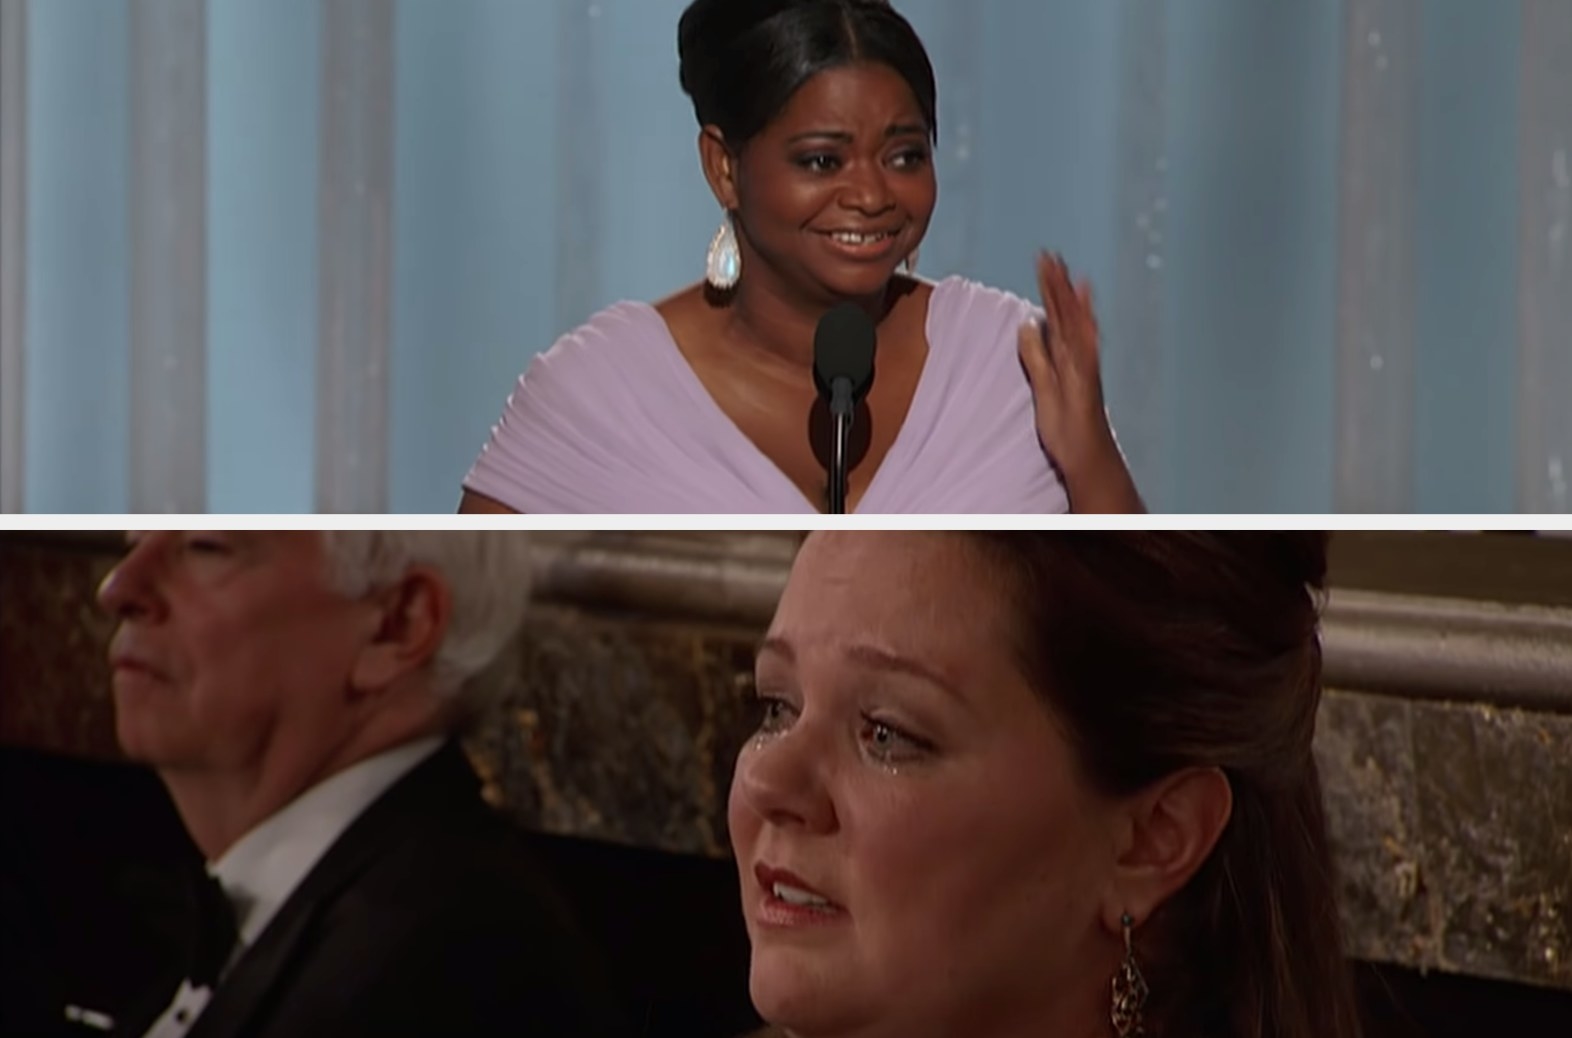 Octavia Spencer accepting the Golden Globe for Best Supporting Actress at the 2012 Golden Globes and Melissa McCarthy crying watching her